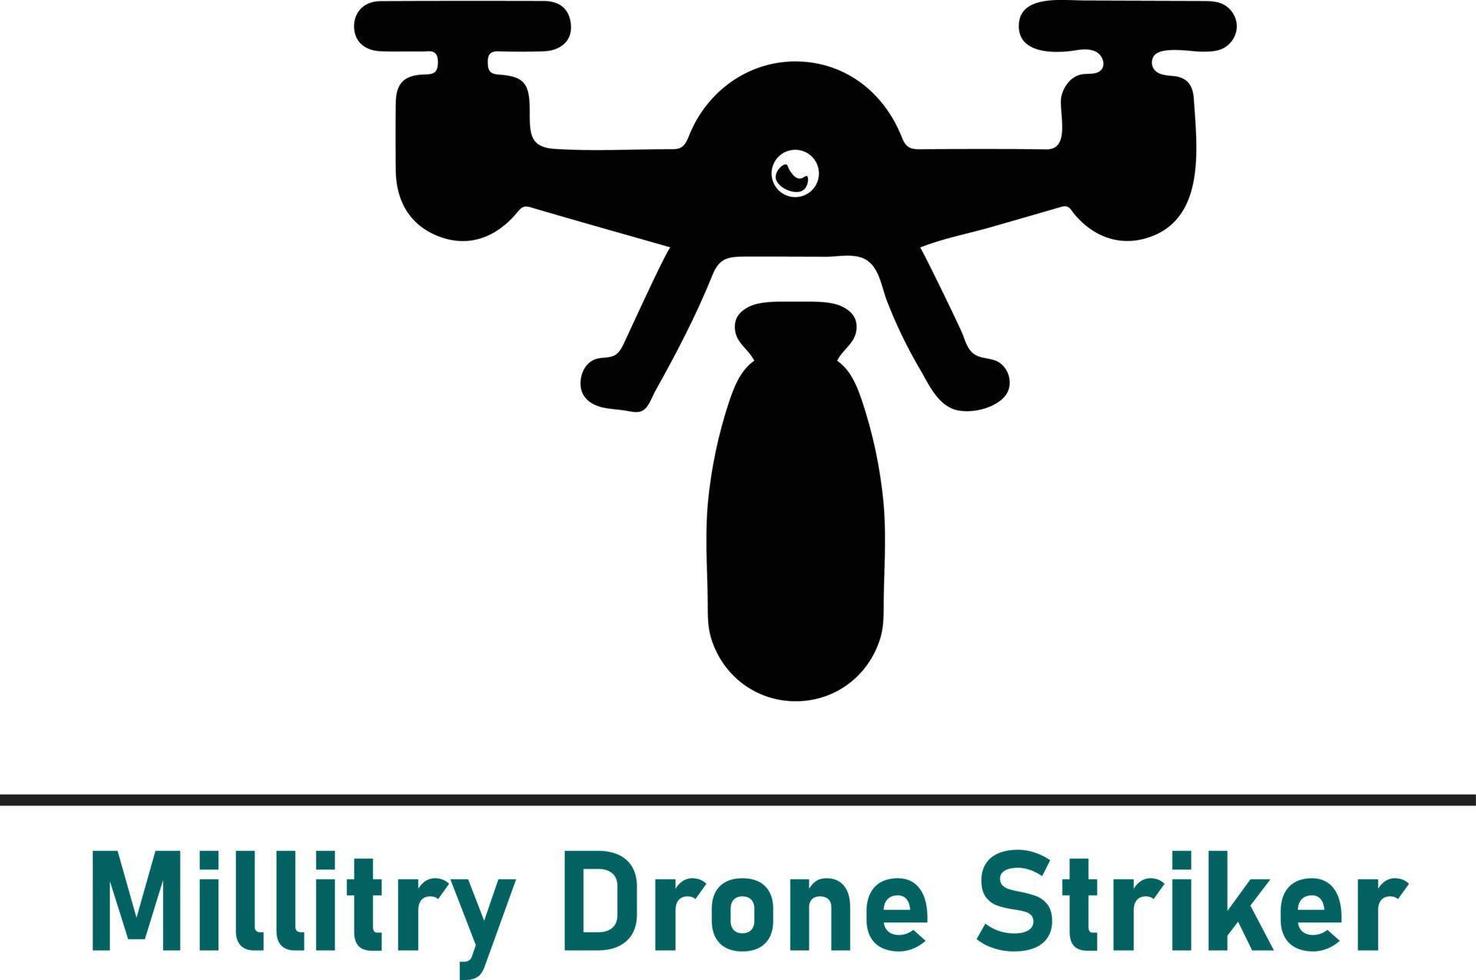 military drone striker icon vector file fully editable and scaable